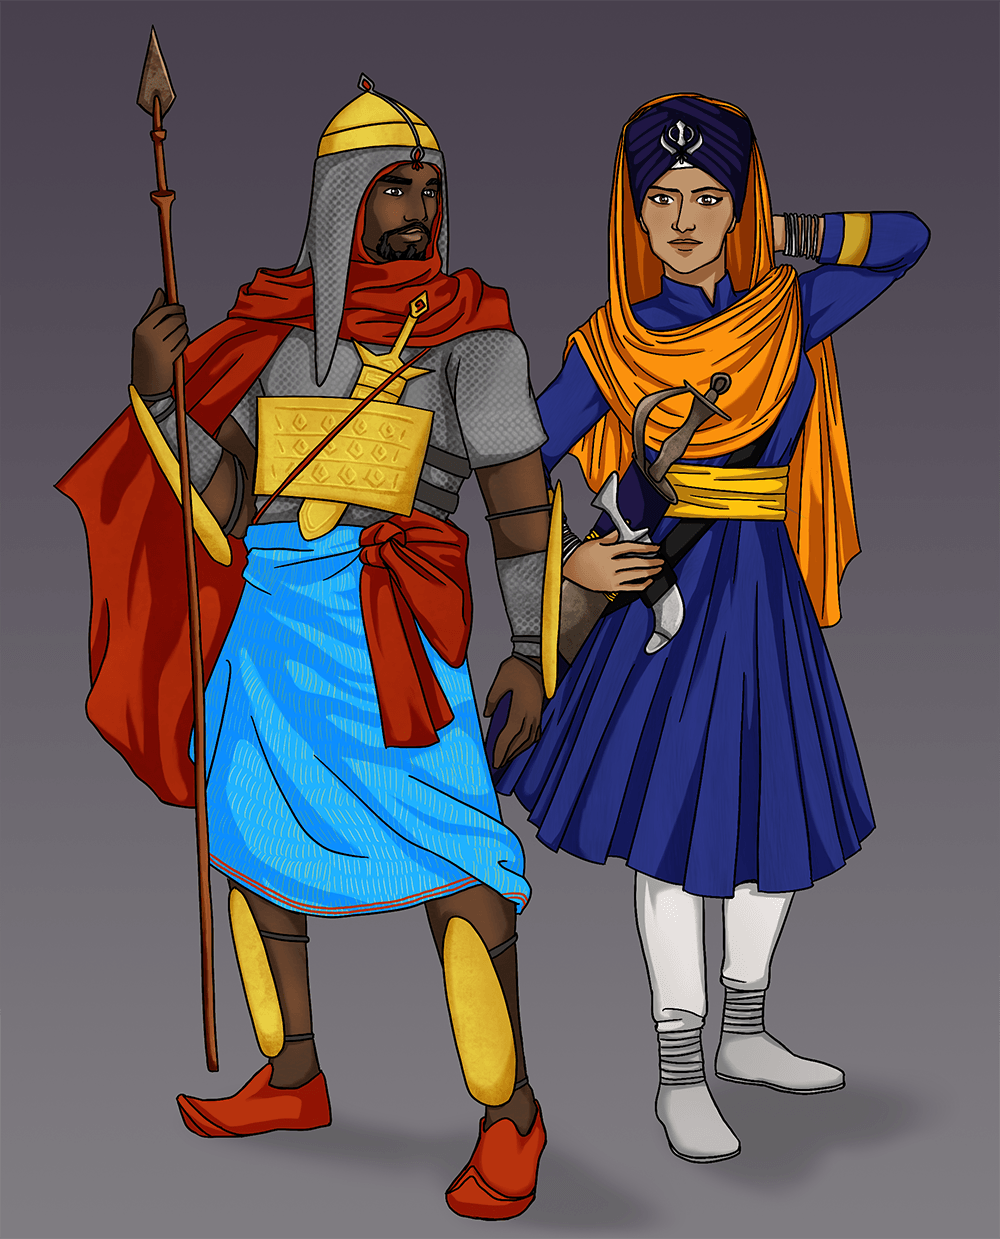 Warriors<br/>Character design artwork using Moor and Sikh cultural clothing